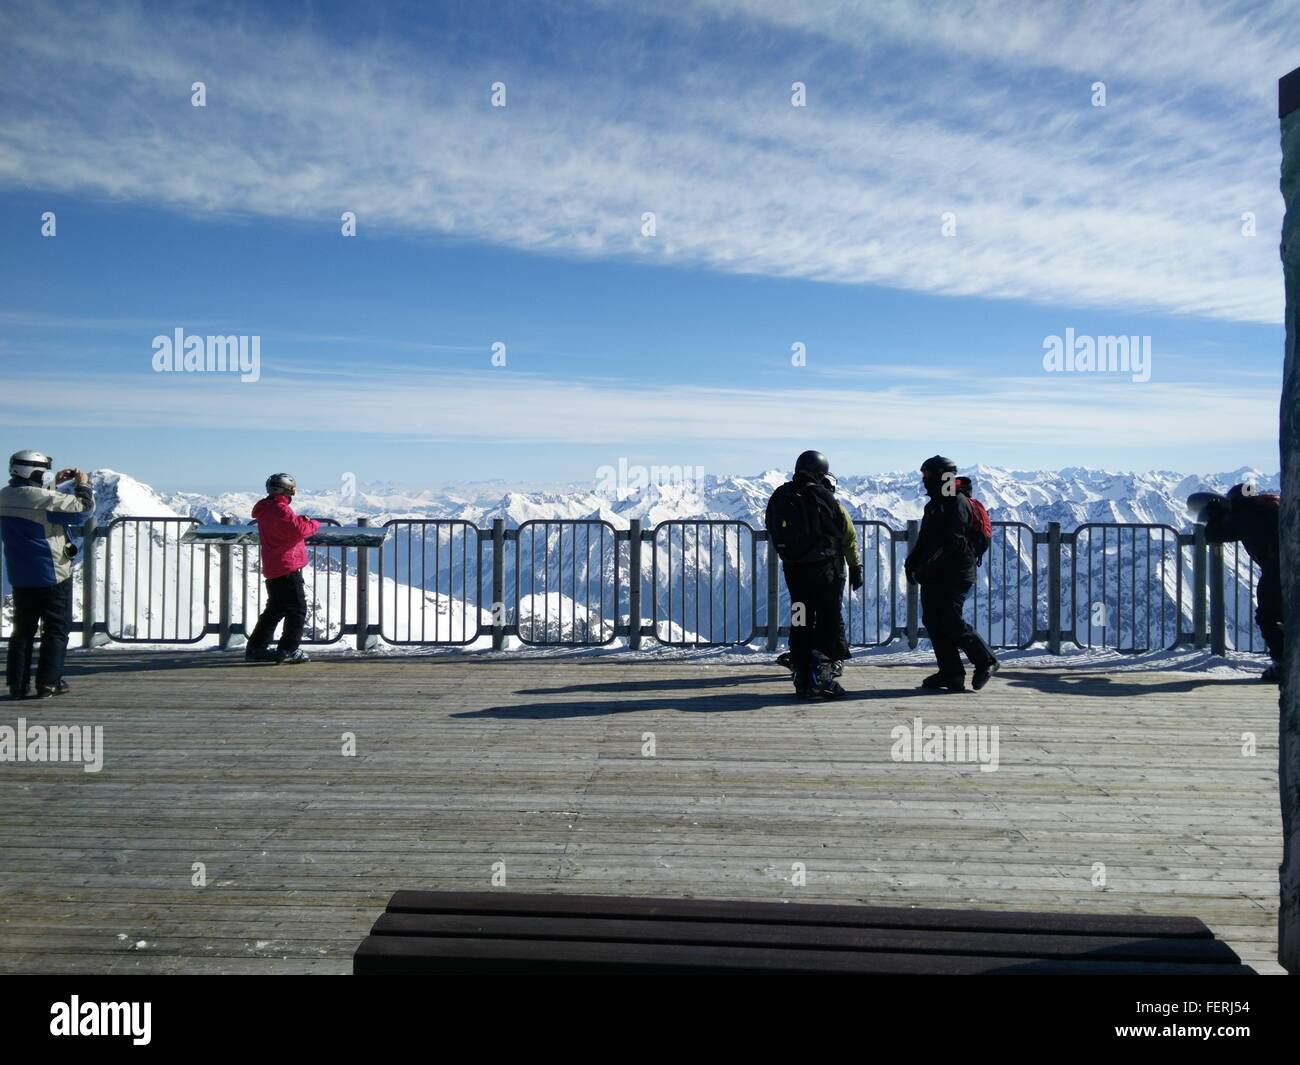 People On Observation Point Against Snowcapped Mountains Stock Photo